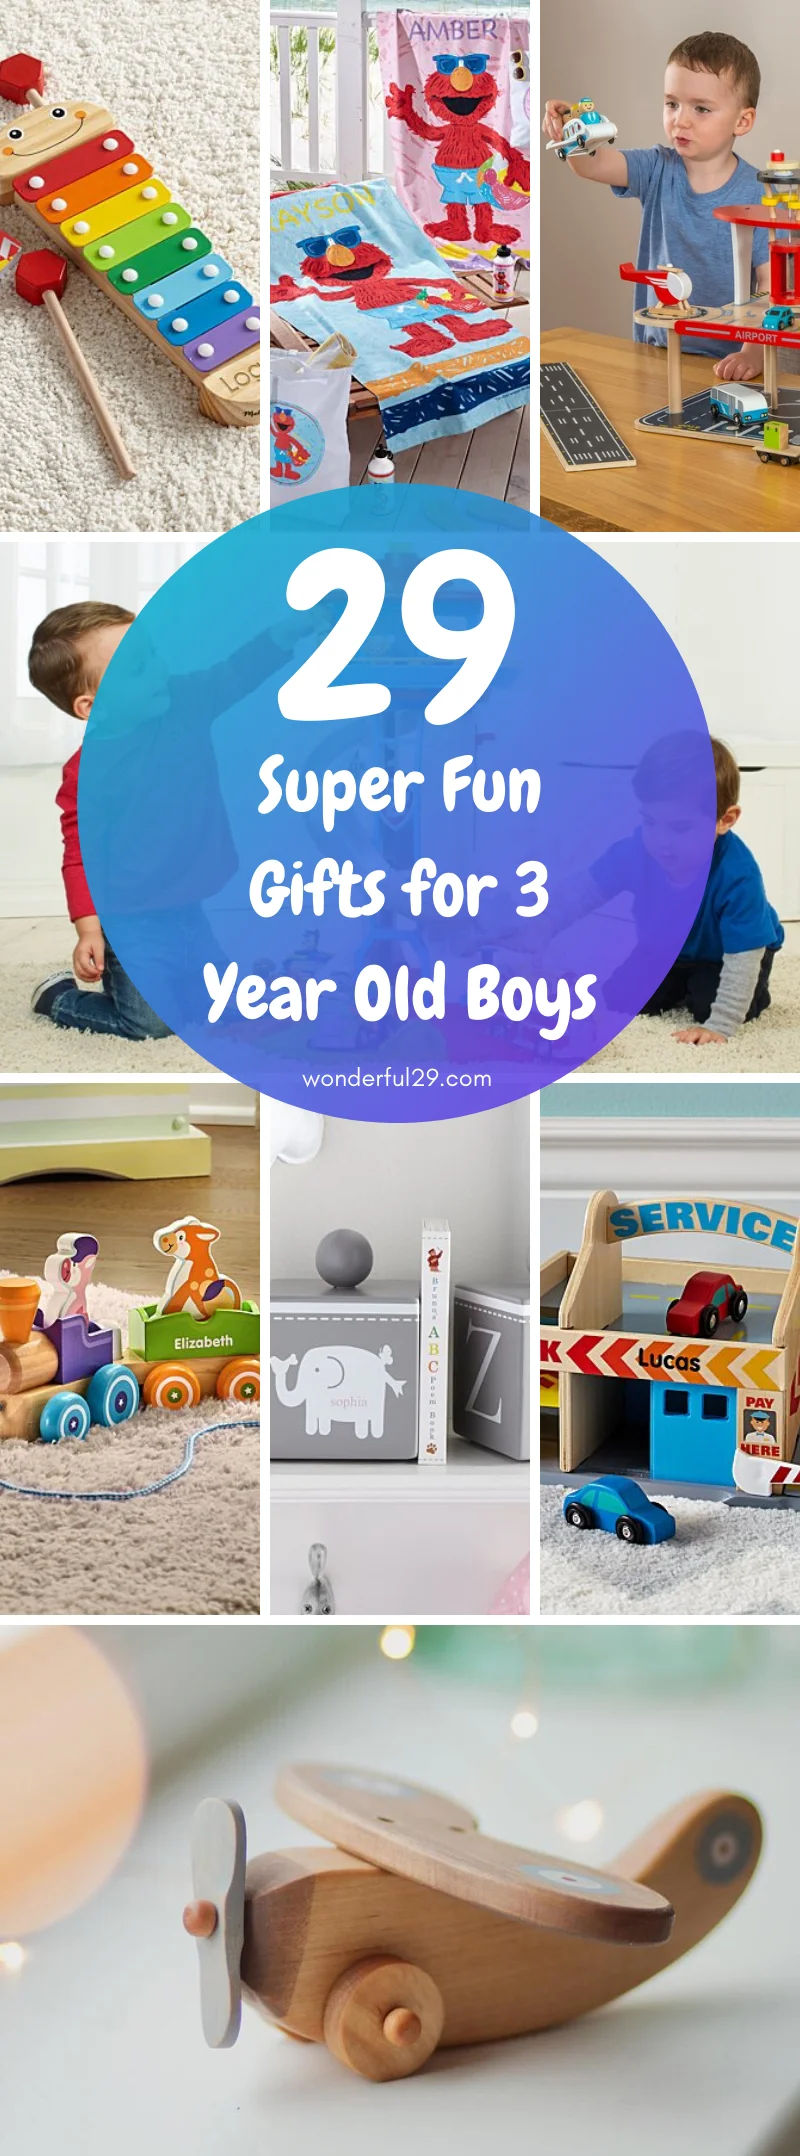 50 Best Gifts and Toys for 4 Year Old Boys (That They'll Love)